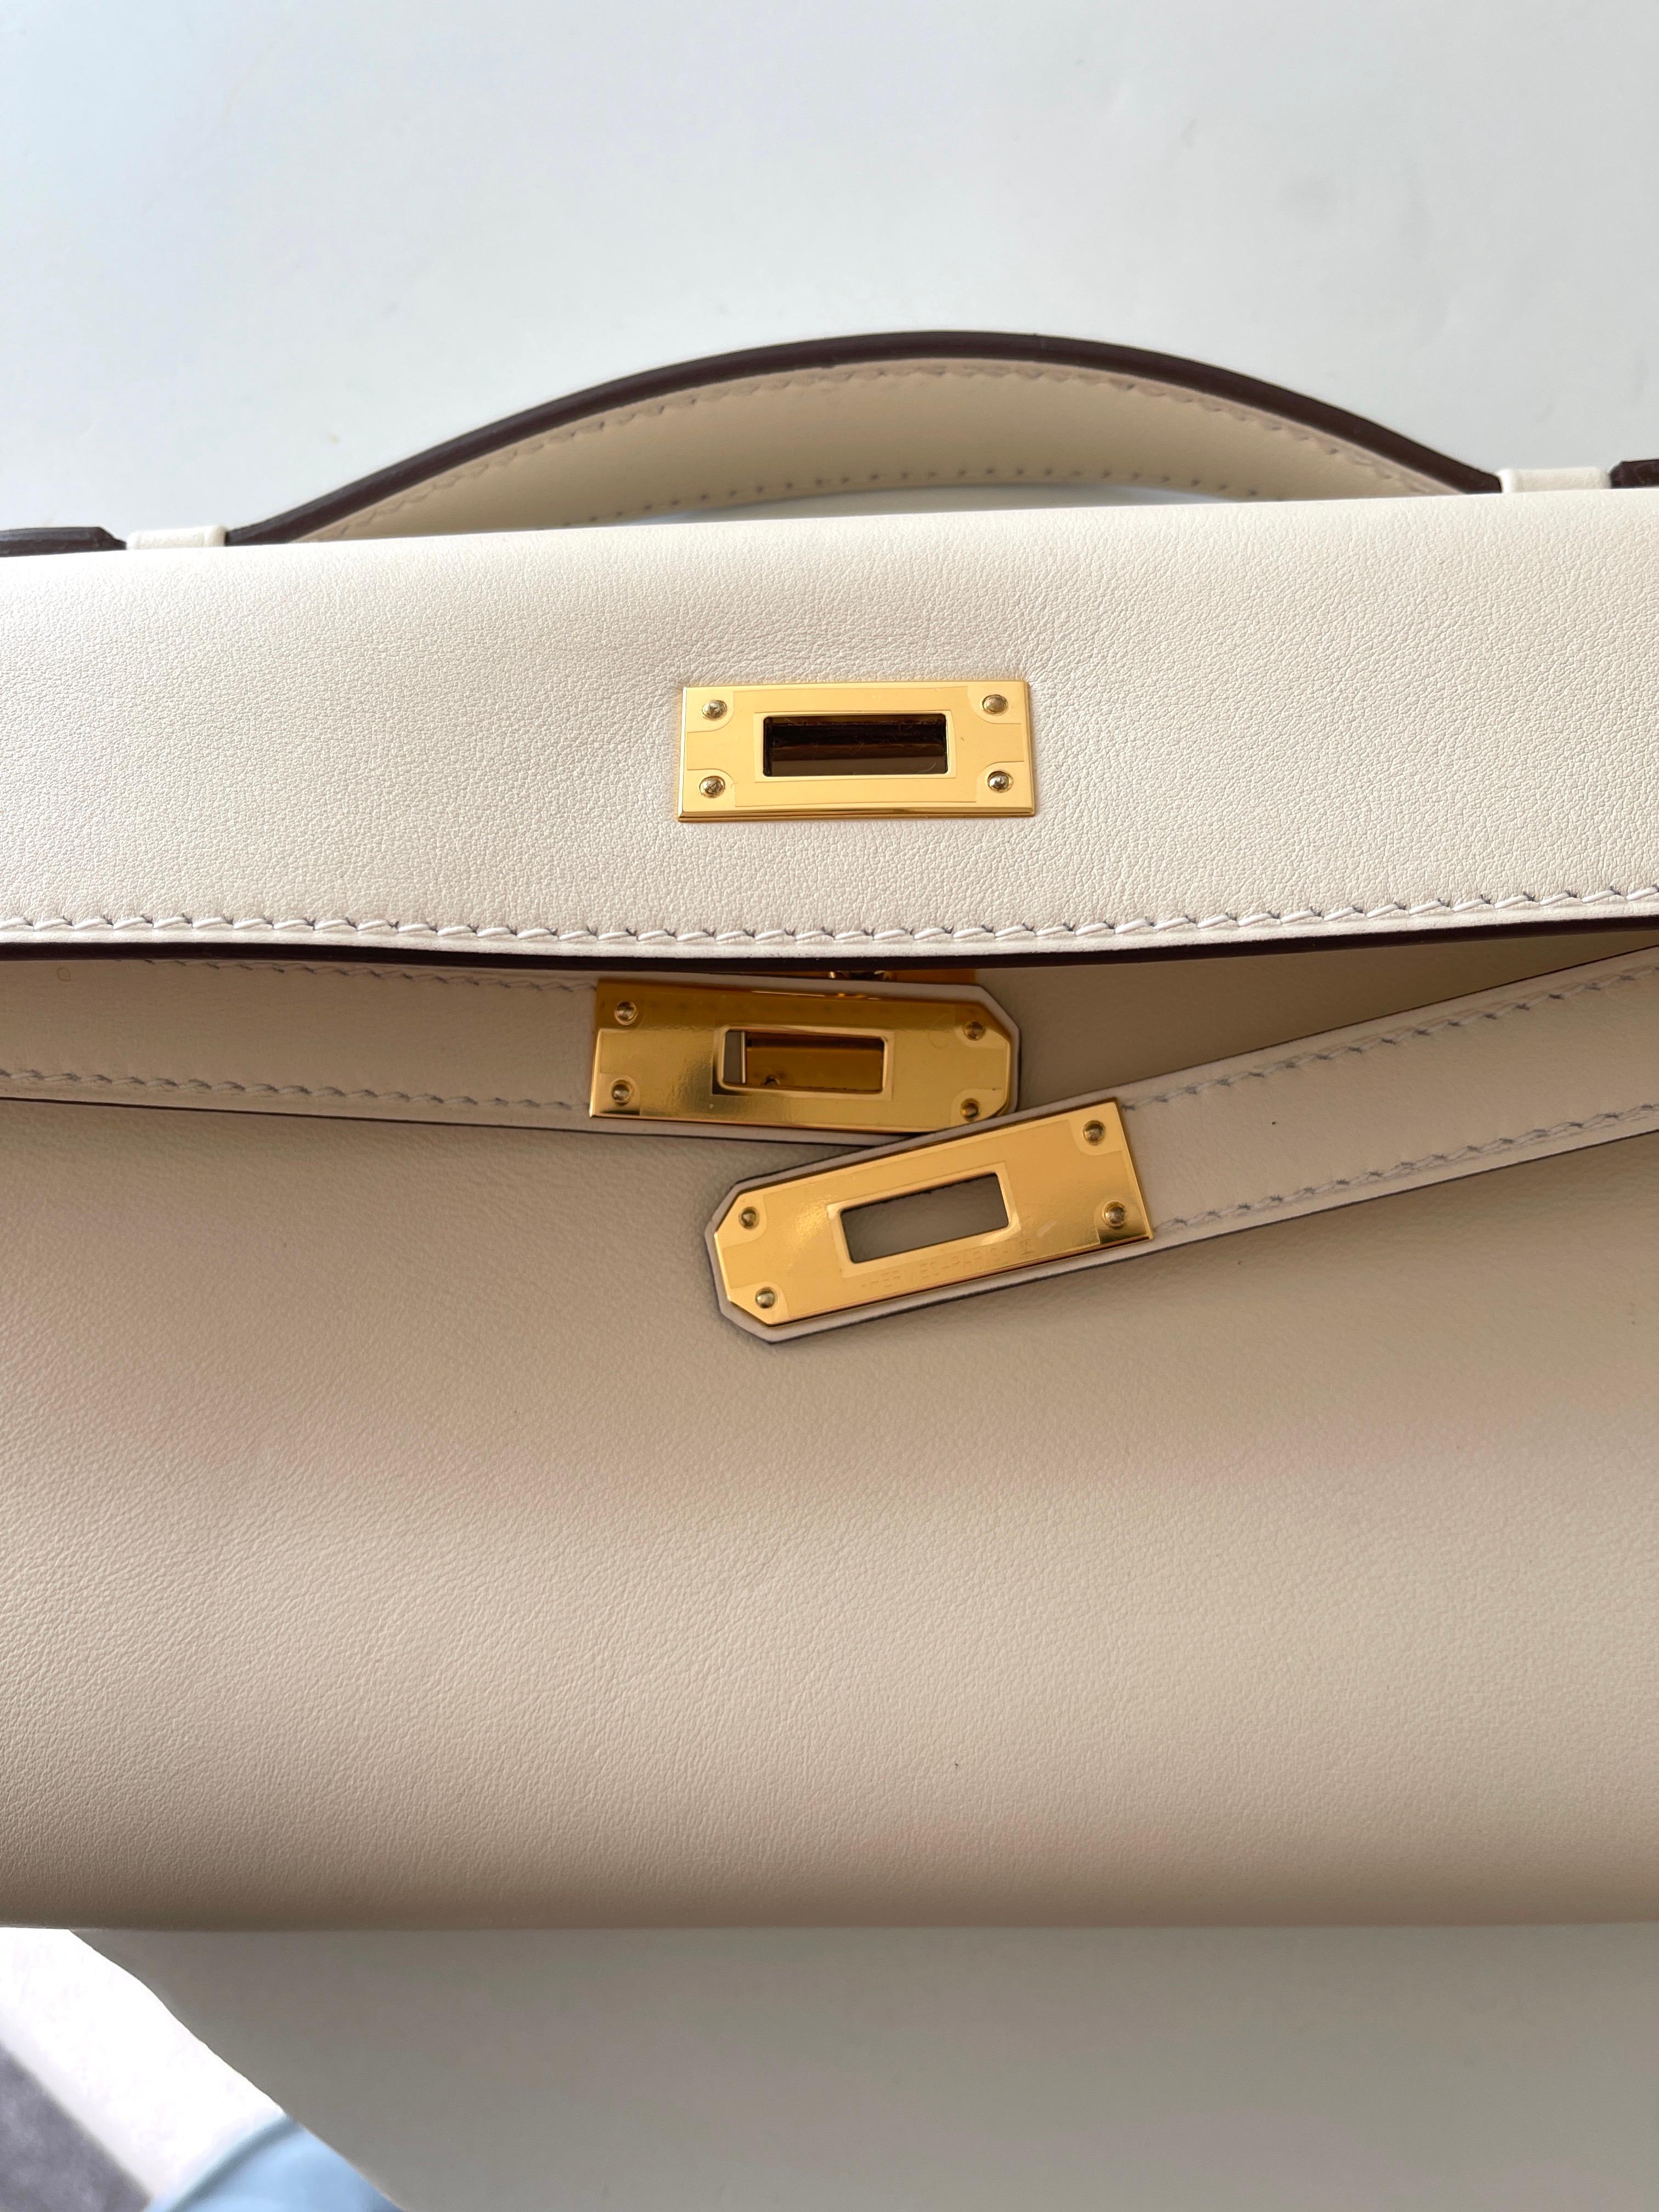 Hermes  Kelly Cut
New color Nata
Swift Leather
Gold Hardware



Plastic on the hardware
Measurements: 31cm x 13cm x 2.5cm (12.25